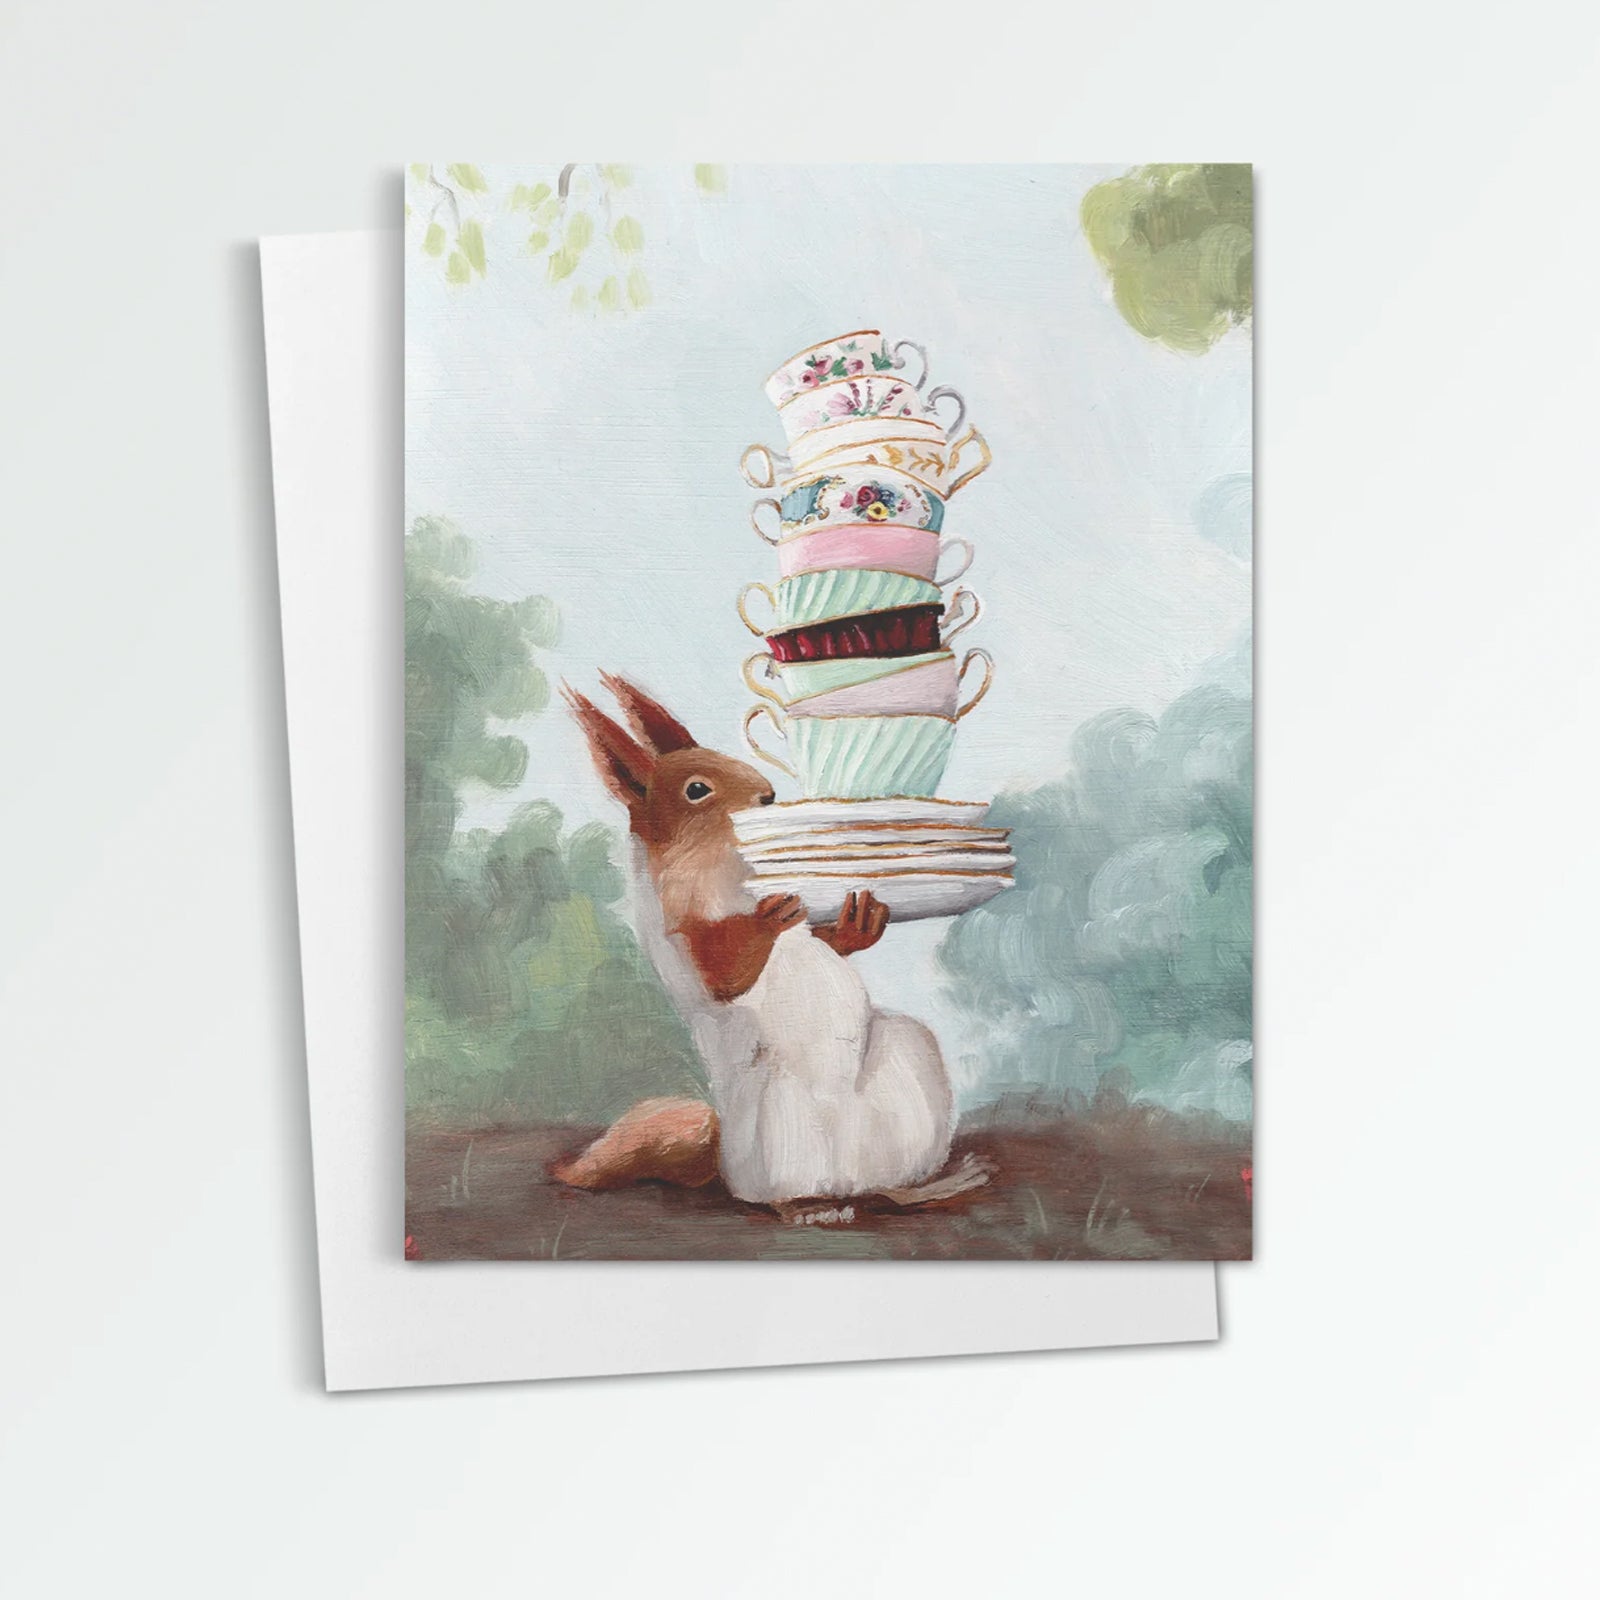 The Good China notecard from Kim Ferreira. A squirrel carries a stack of teacups and saucers.